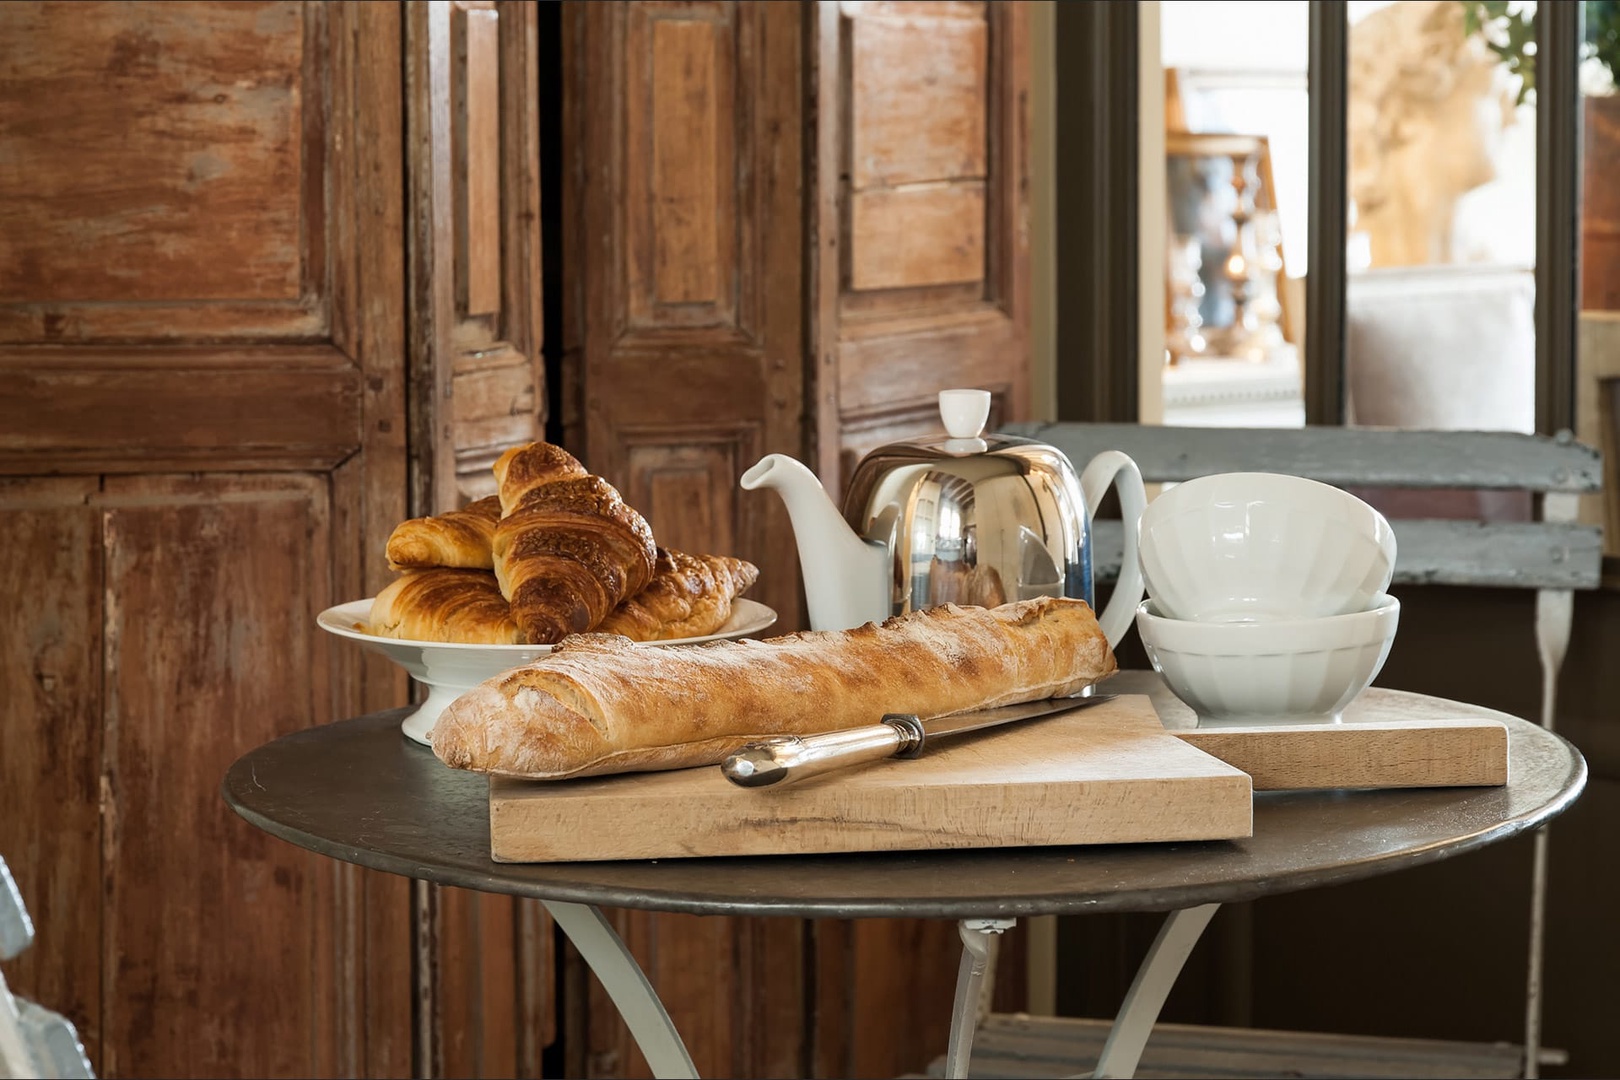 Start your day with a typical Parisian breakfast of croissants, baguettes and coffee!